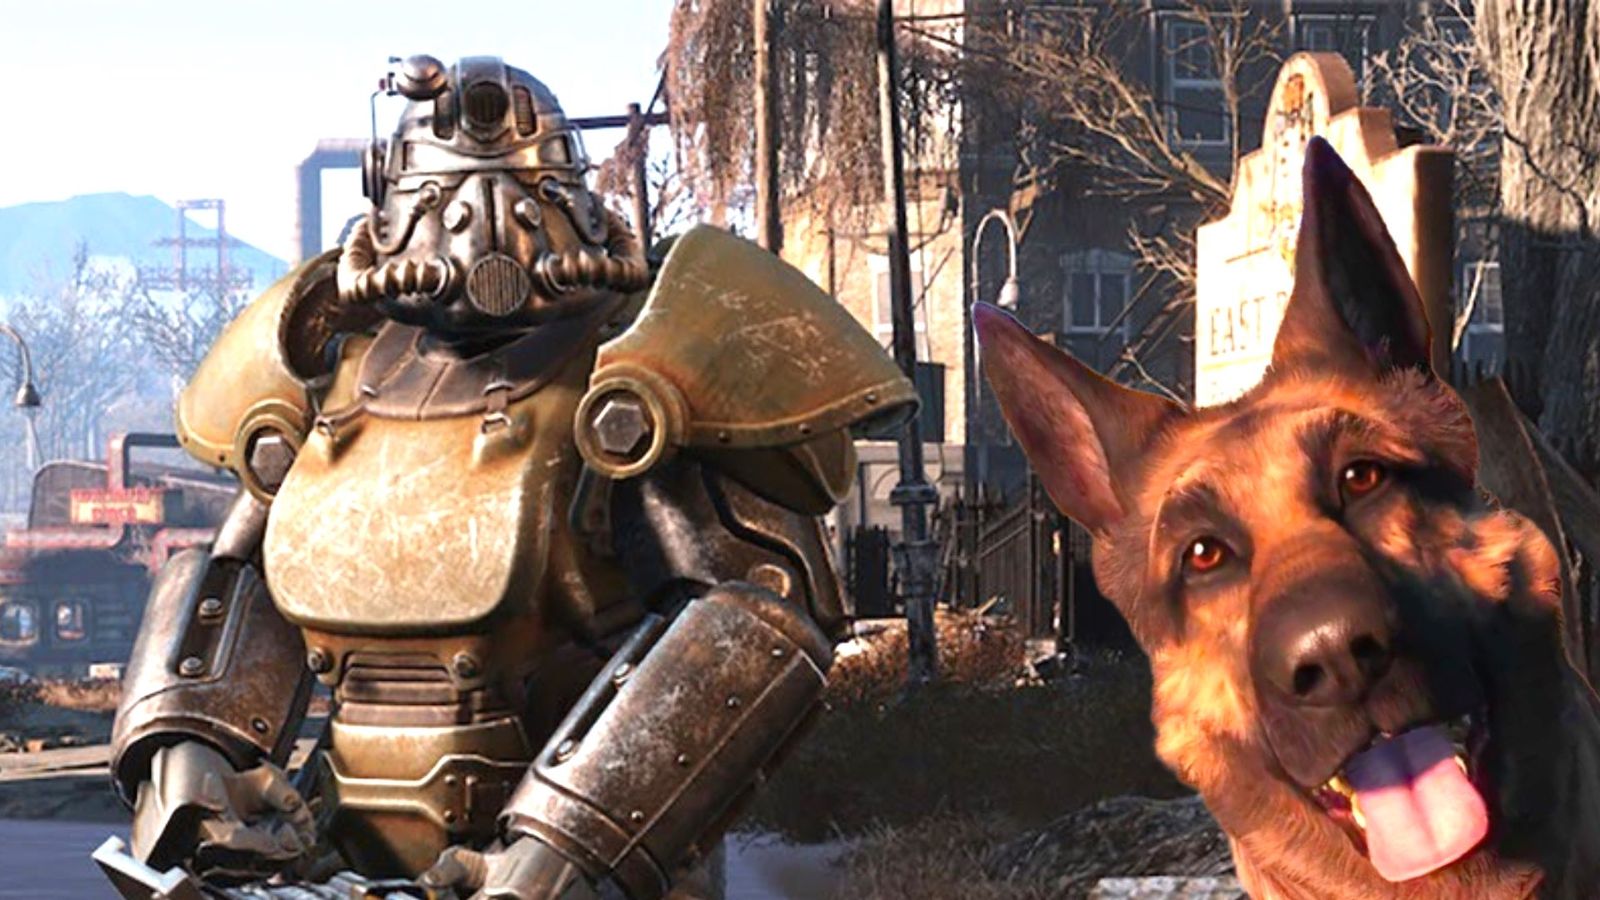 A Fallout 4 power armor soldier next to a smiling dog meat 